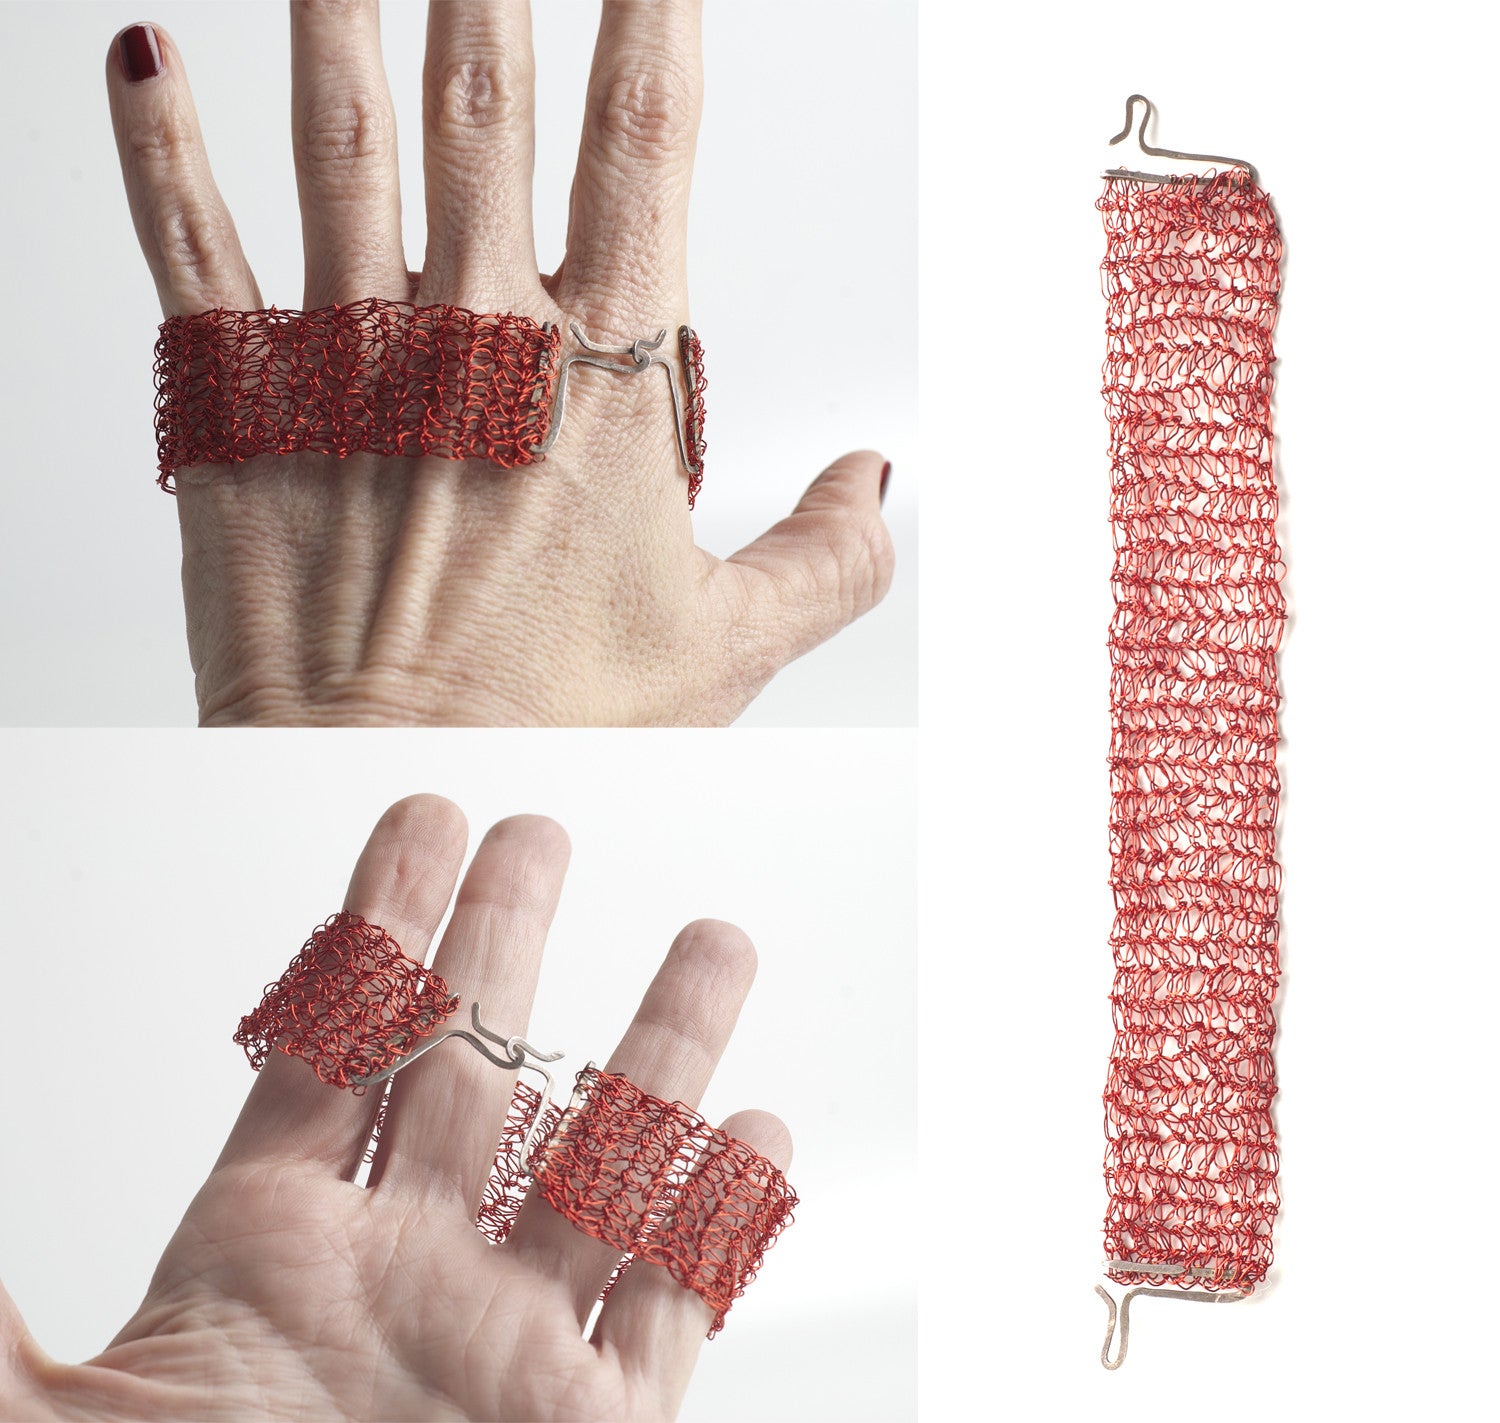 Closed metal rings - findings for wire crochet jewelry making - Yooladesign